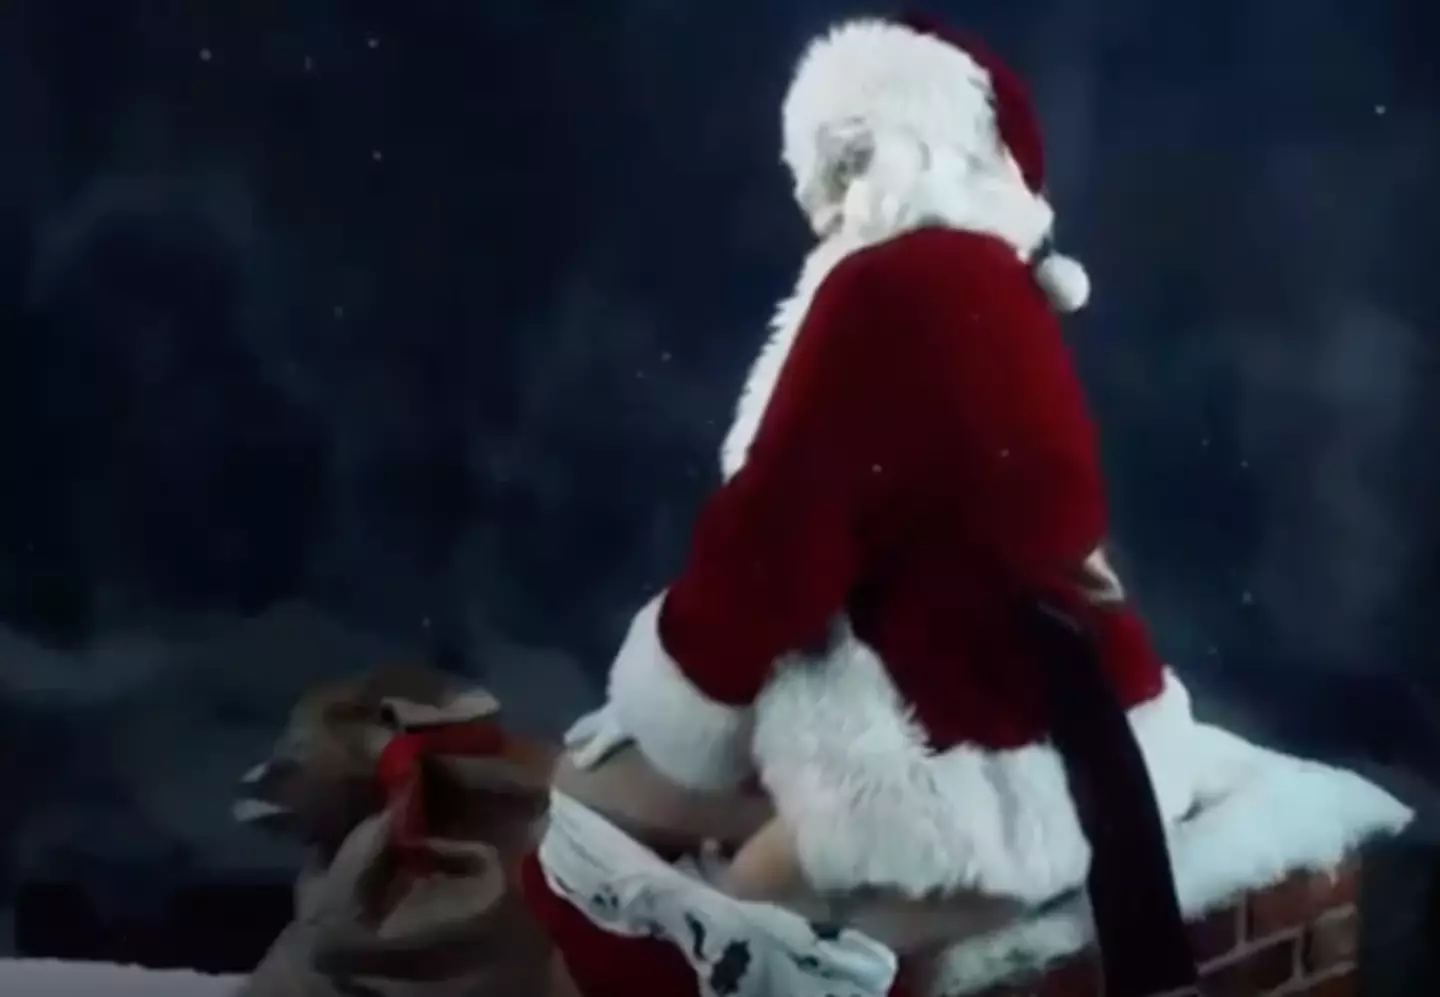 The Santa-for-hire service warns the new launch is 'not for the faint-hearted'.